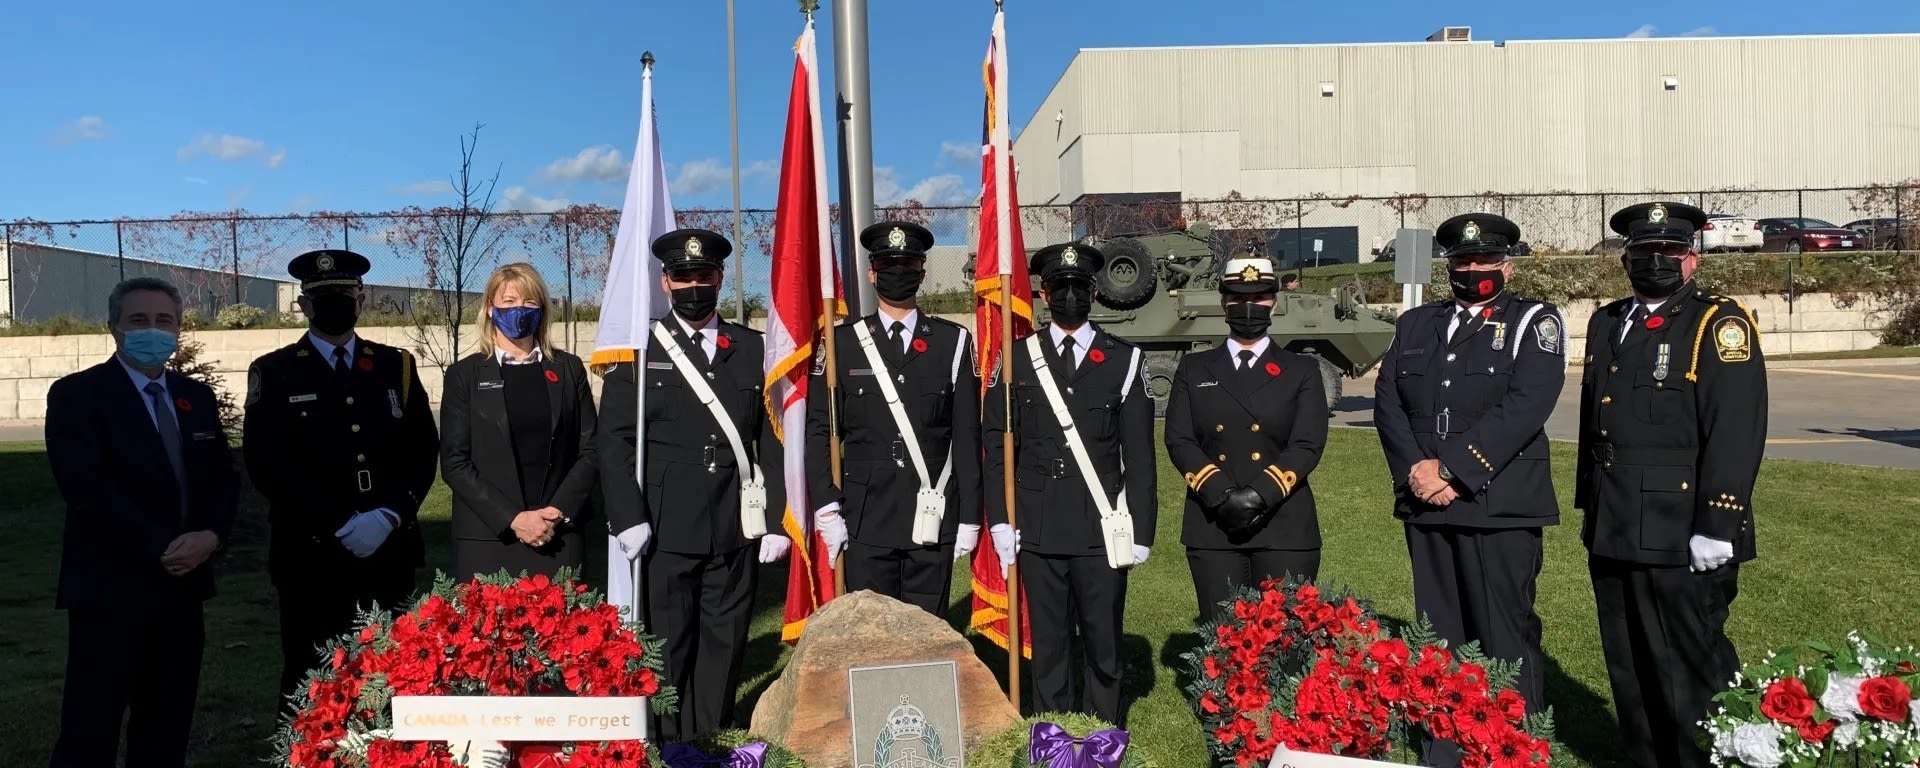 Metrolinx's Remembrance Day ceremony allows staff to pay tribute to veterans' sacrifices.